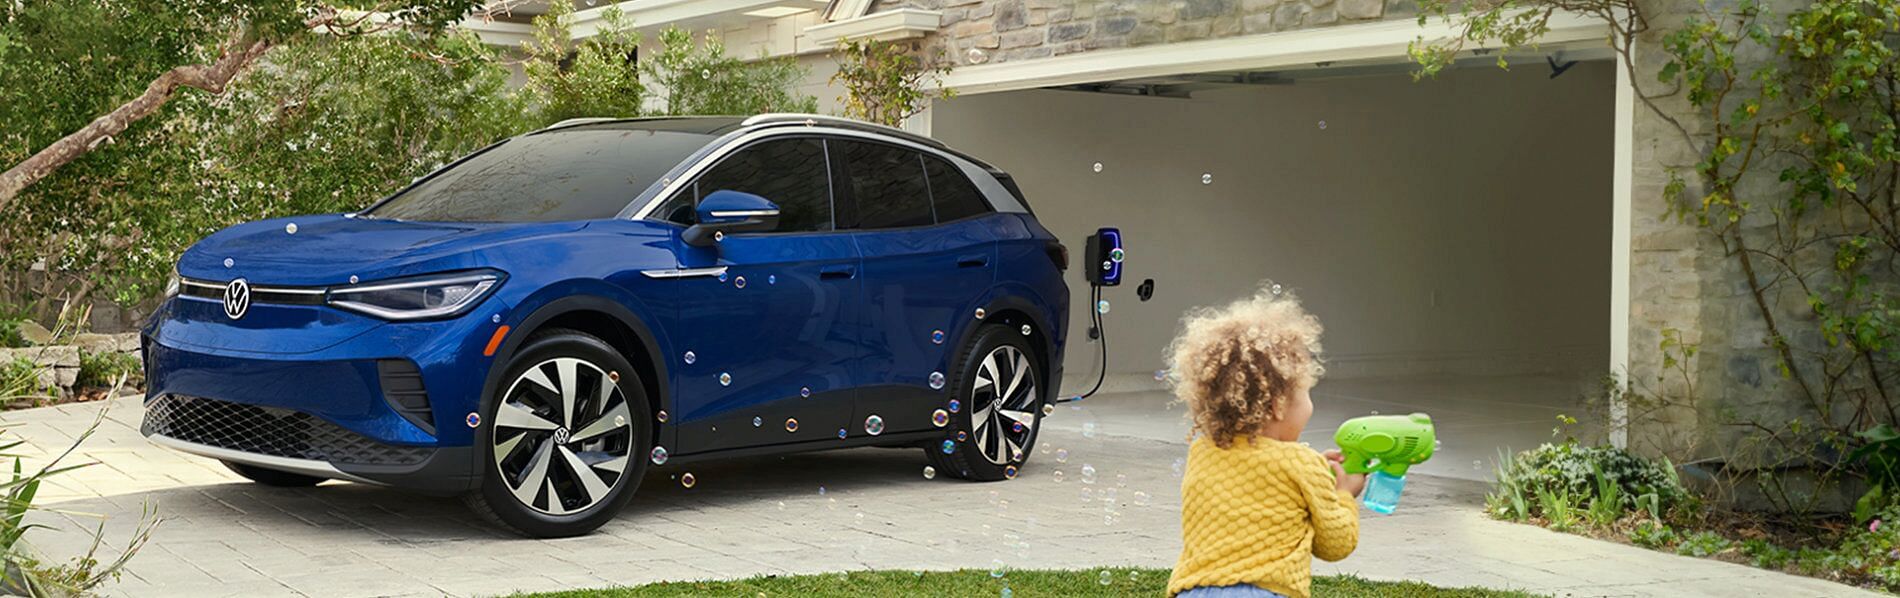 Volkswagen ID.4 2021 parked in the driveway. Child in the foreground playing with soap bubbles